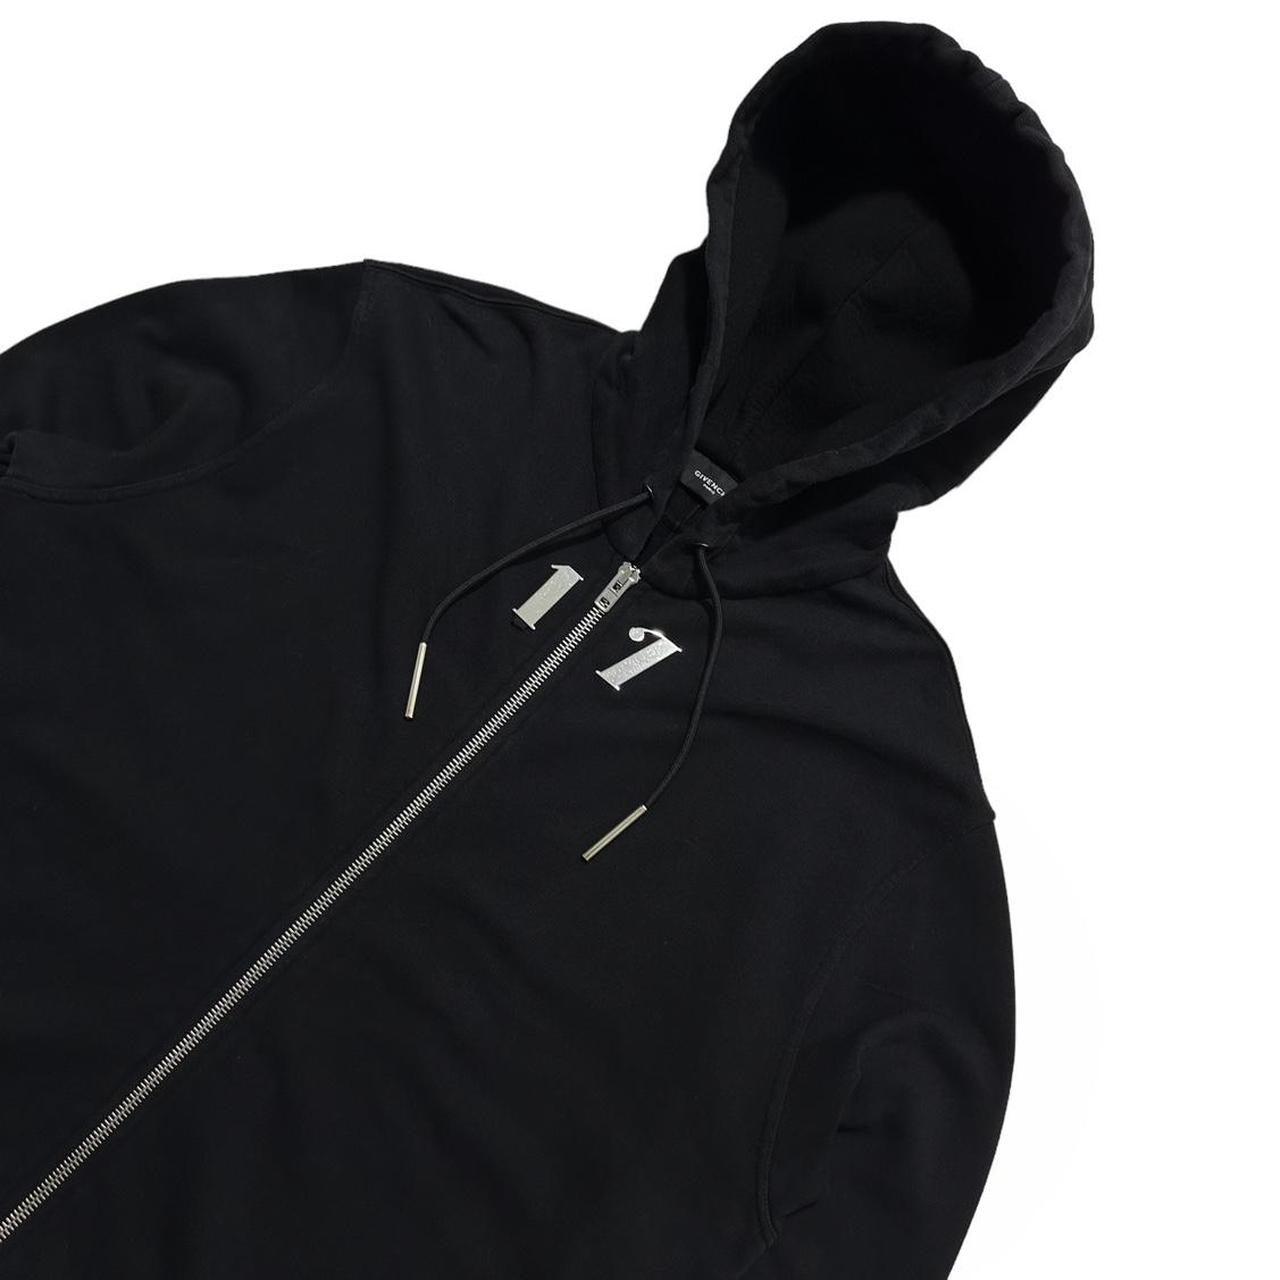 Givenchy ‘17’ Black Full Zip Hoodie - Known Source